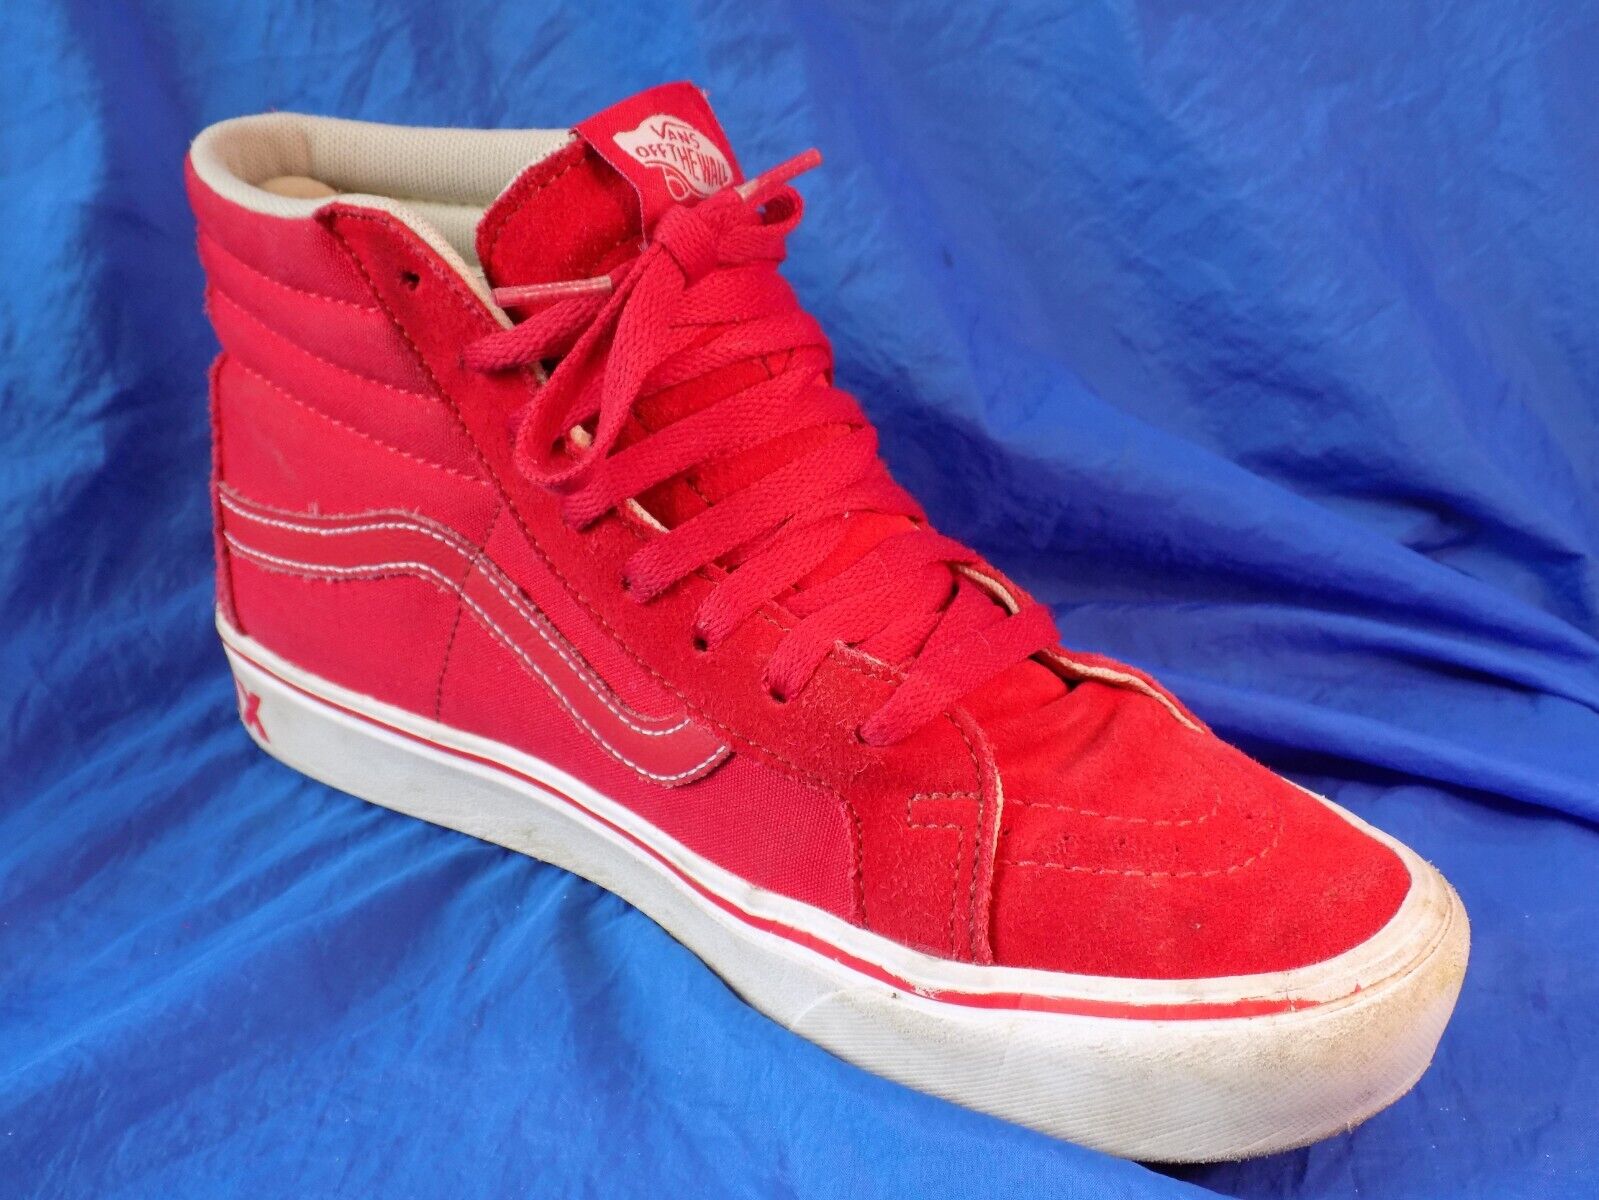 VANS Off The Wall SIXTY SIX Red Mid Top Sneakers Men 8.5Wn 10 UK 7.5